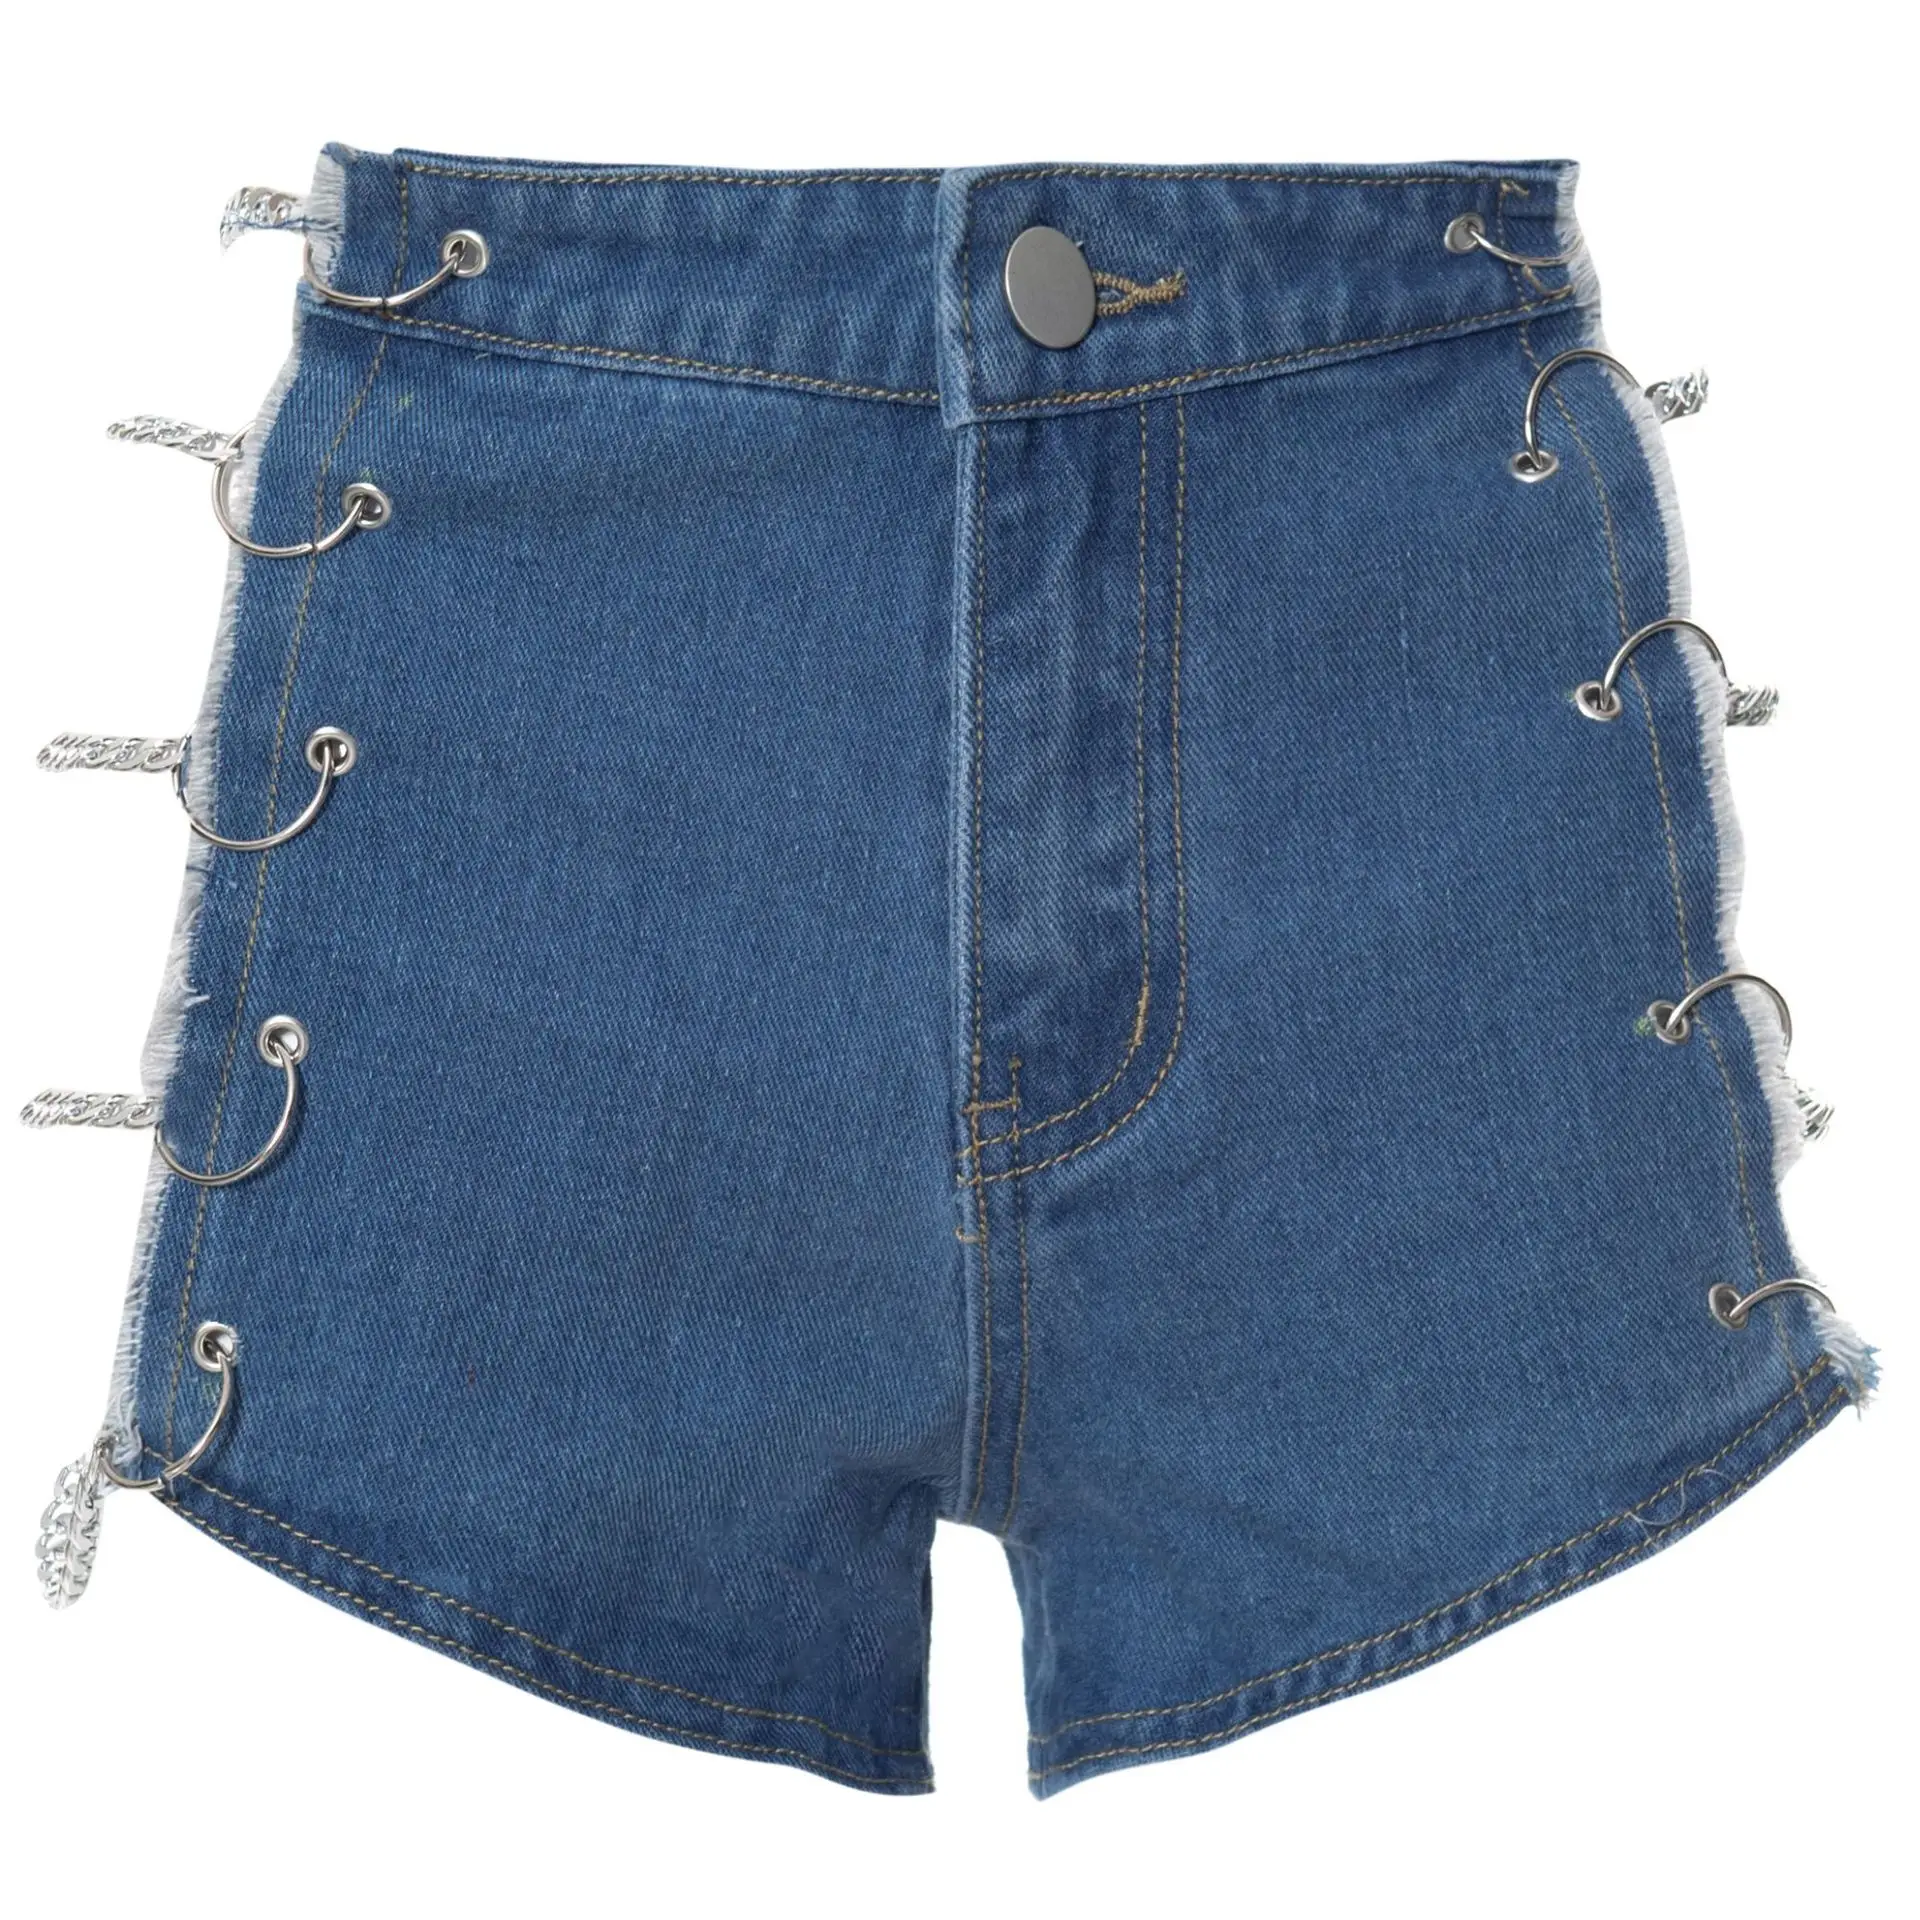 ANJAMANOR Denim Shorts Fashion Side Chain Cut Out Sexy Jeans Womens Summer Blue Denim Distressed Booty Shorts D85-DE29 african dresses Shorts